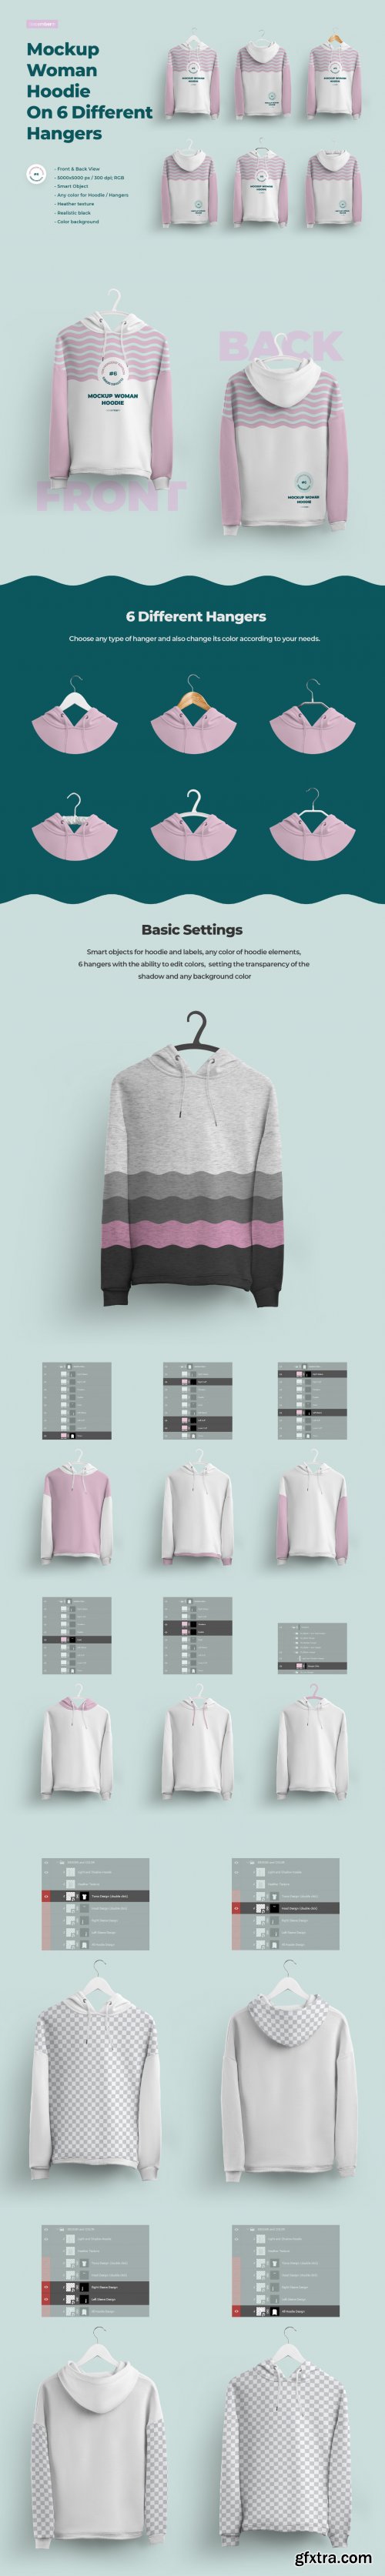 Front and Back Woman Hoodie Mockup On 6 different hangers